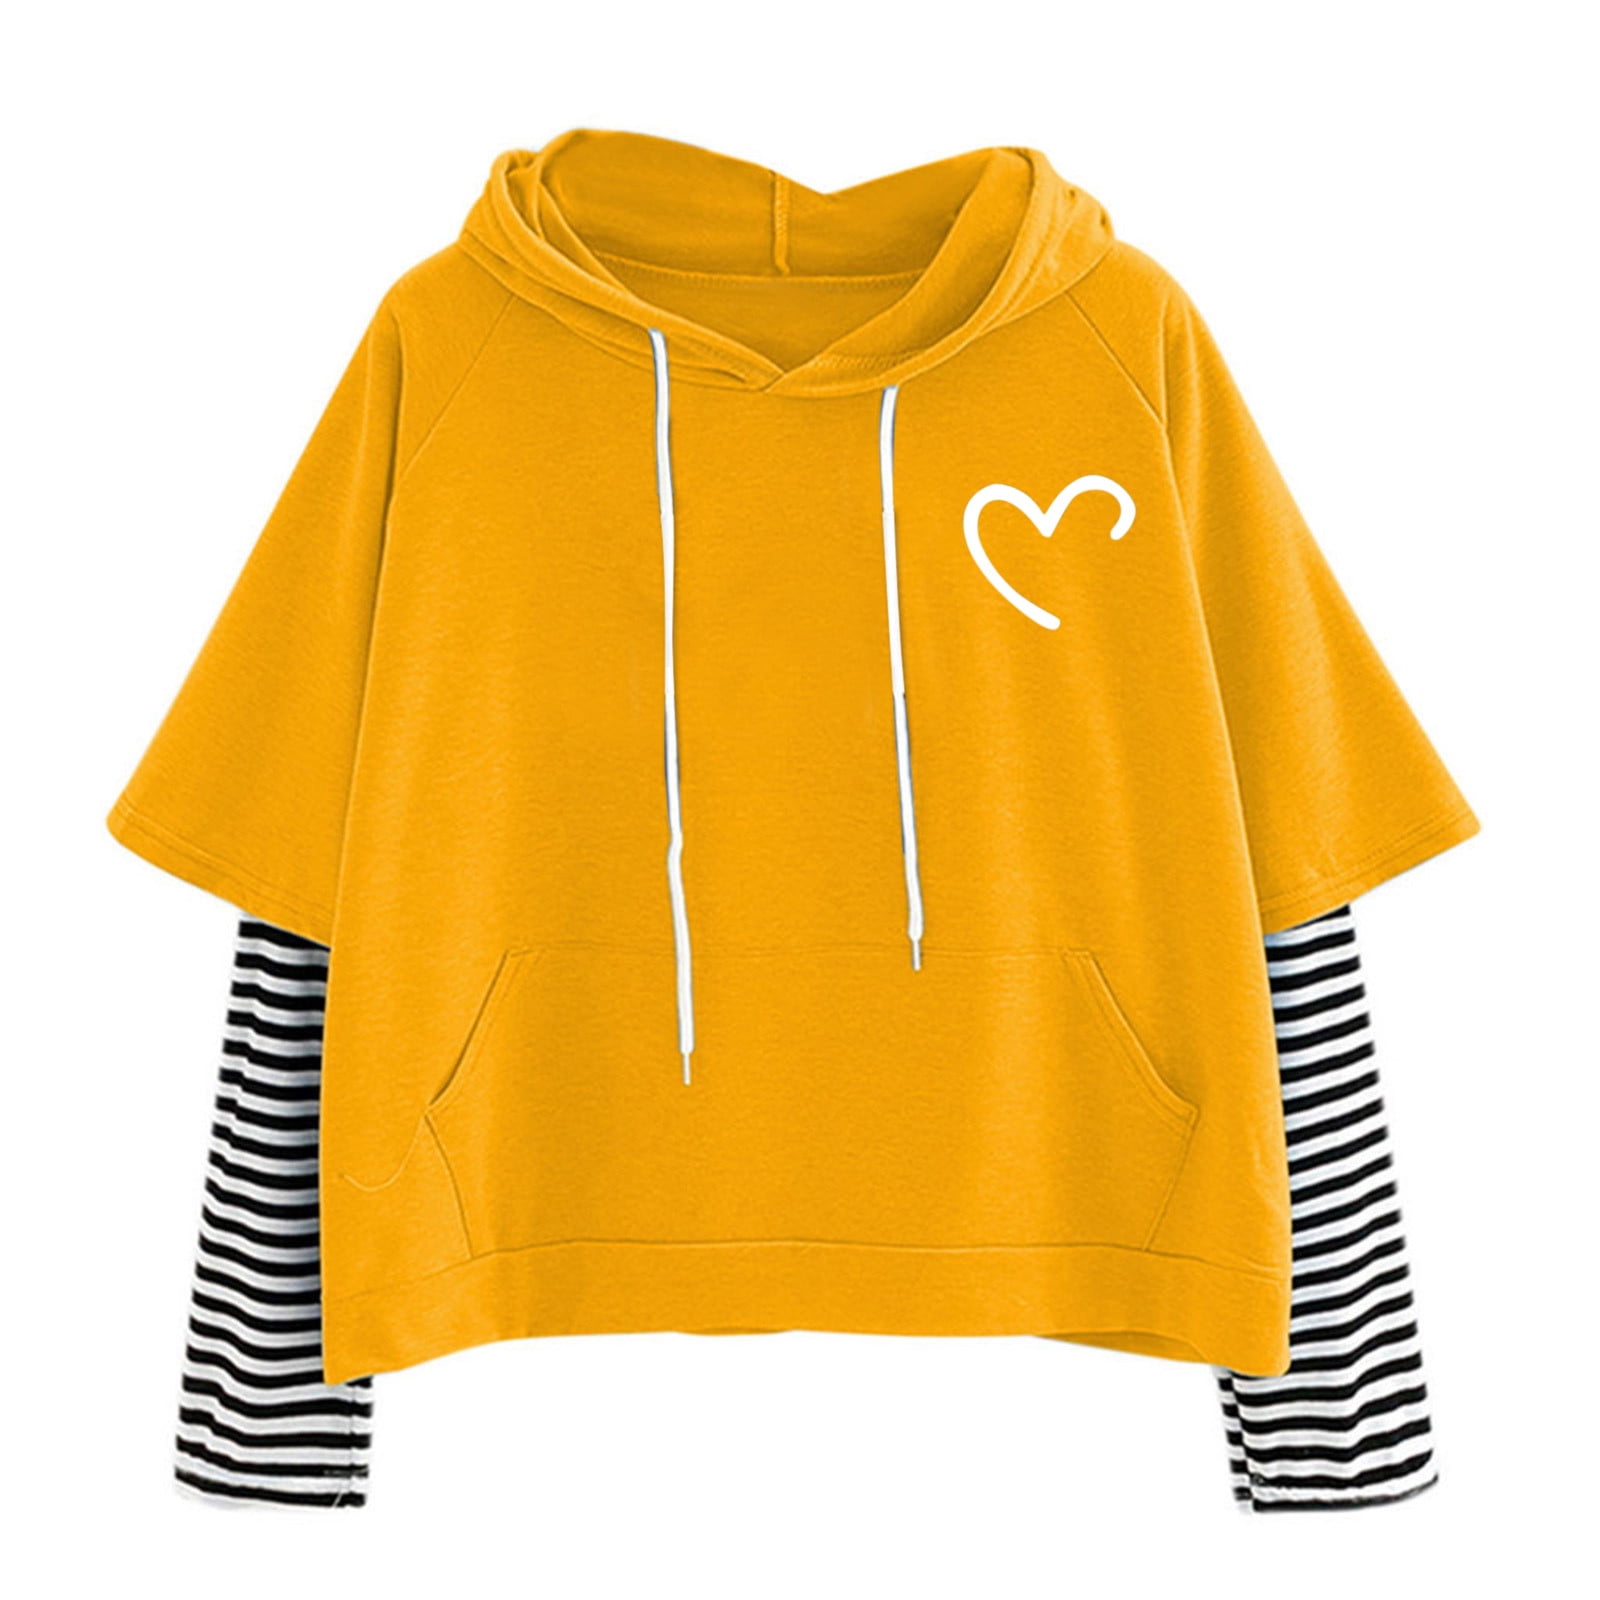 Cyber&monday Deals Dyegold Hoodies for Women Teen Girls Cute Funny Graphic Sweatshirts Casual Loose Long Sleeve Hooed Pullover Tops with Pocket